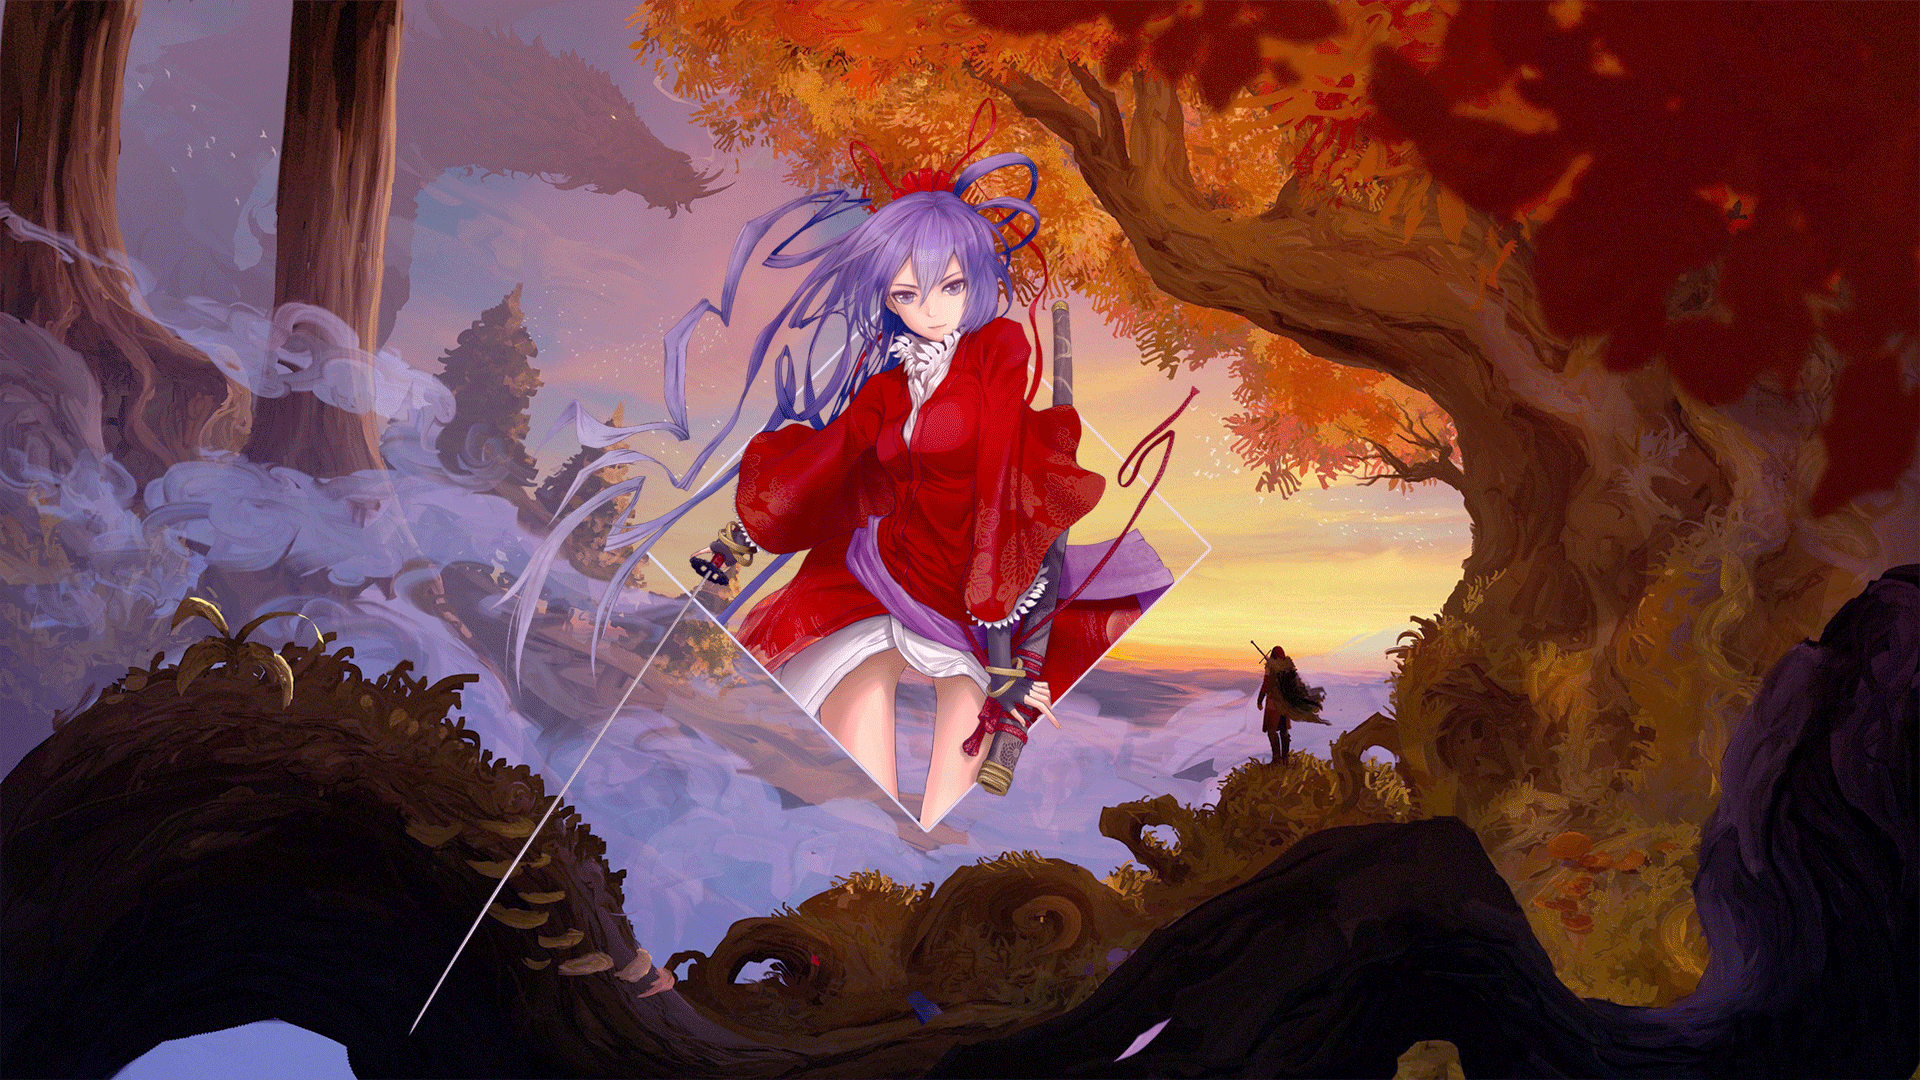 Anime Anime Girls Katana Red Dress Background Art Landscape Trees Samurai Picture In Picture Photosh 1920x1080